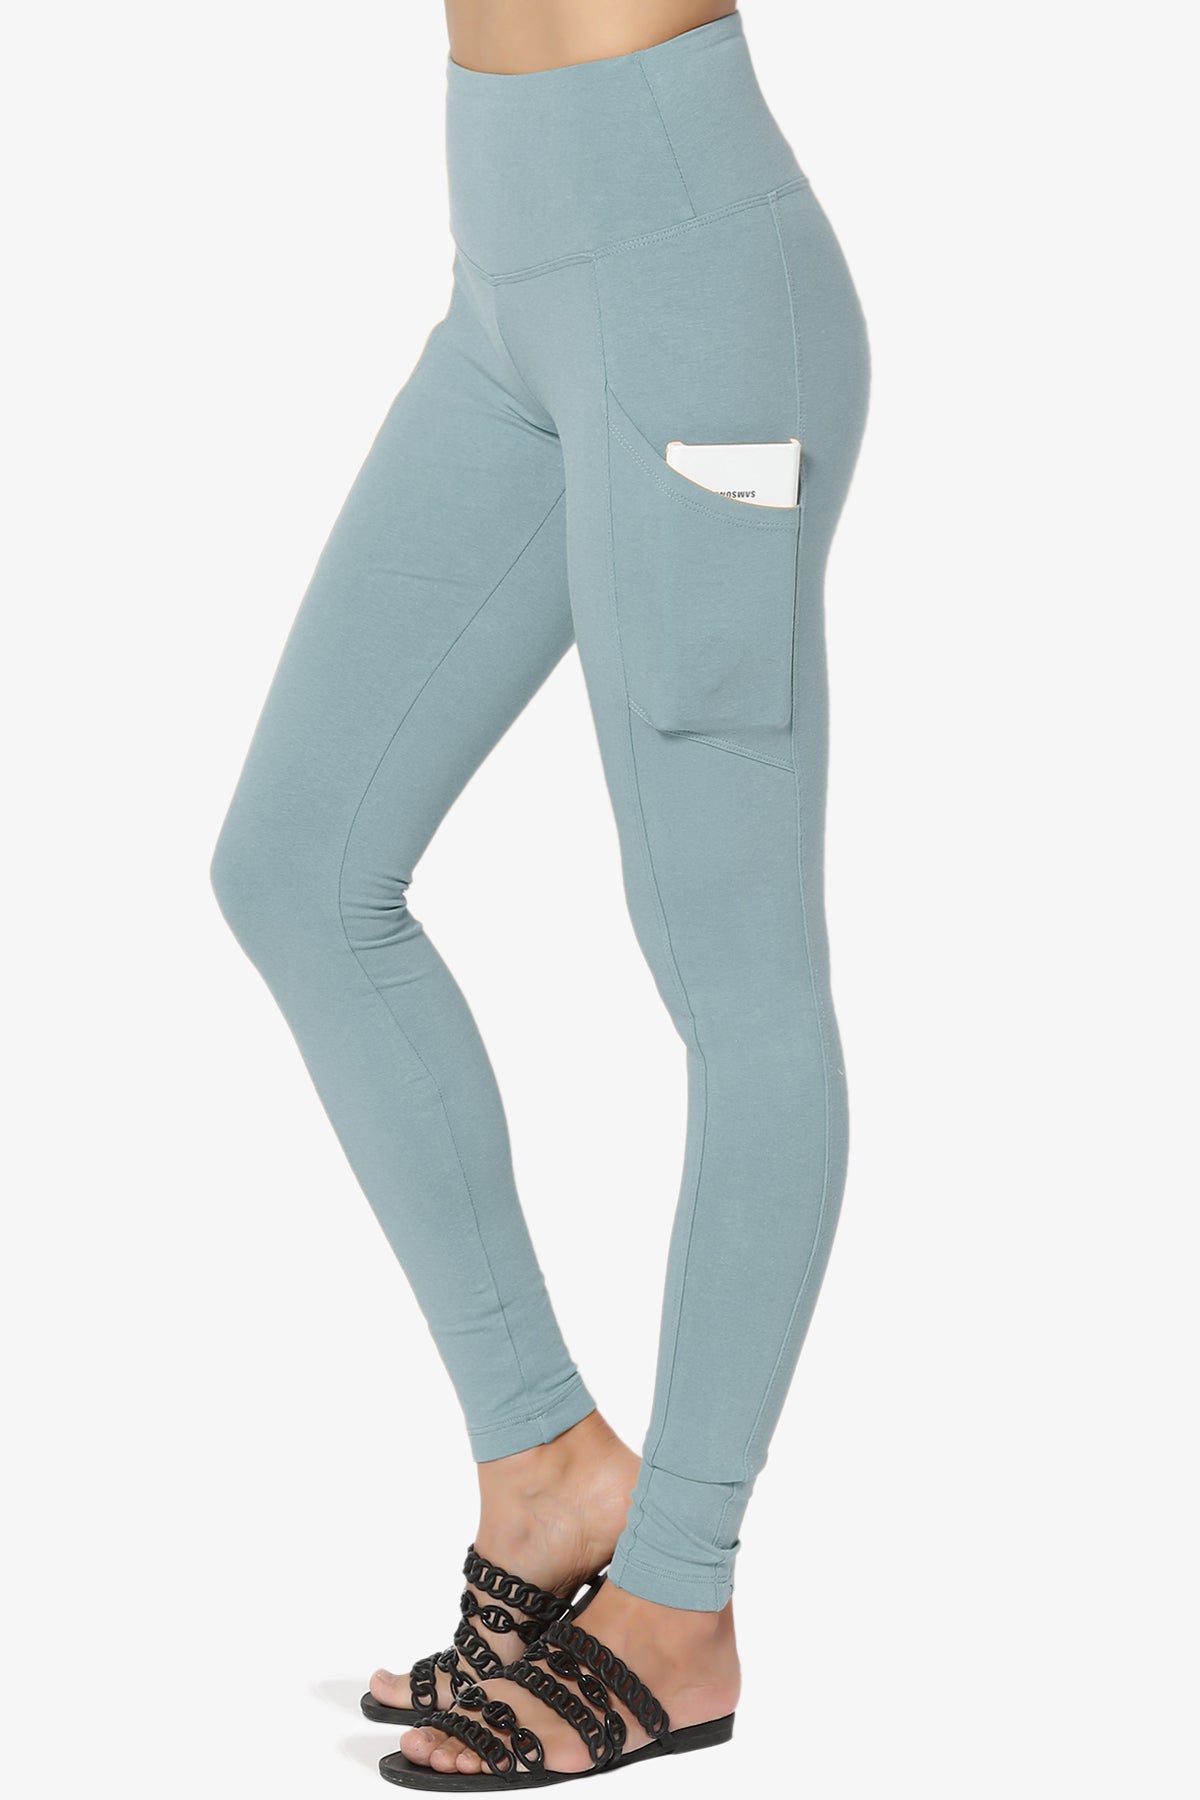 Ansley Luxe Cotton Leggings with Pockets DUSTY BLUE_1